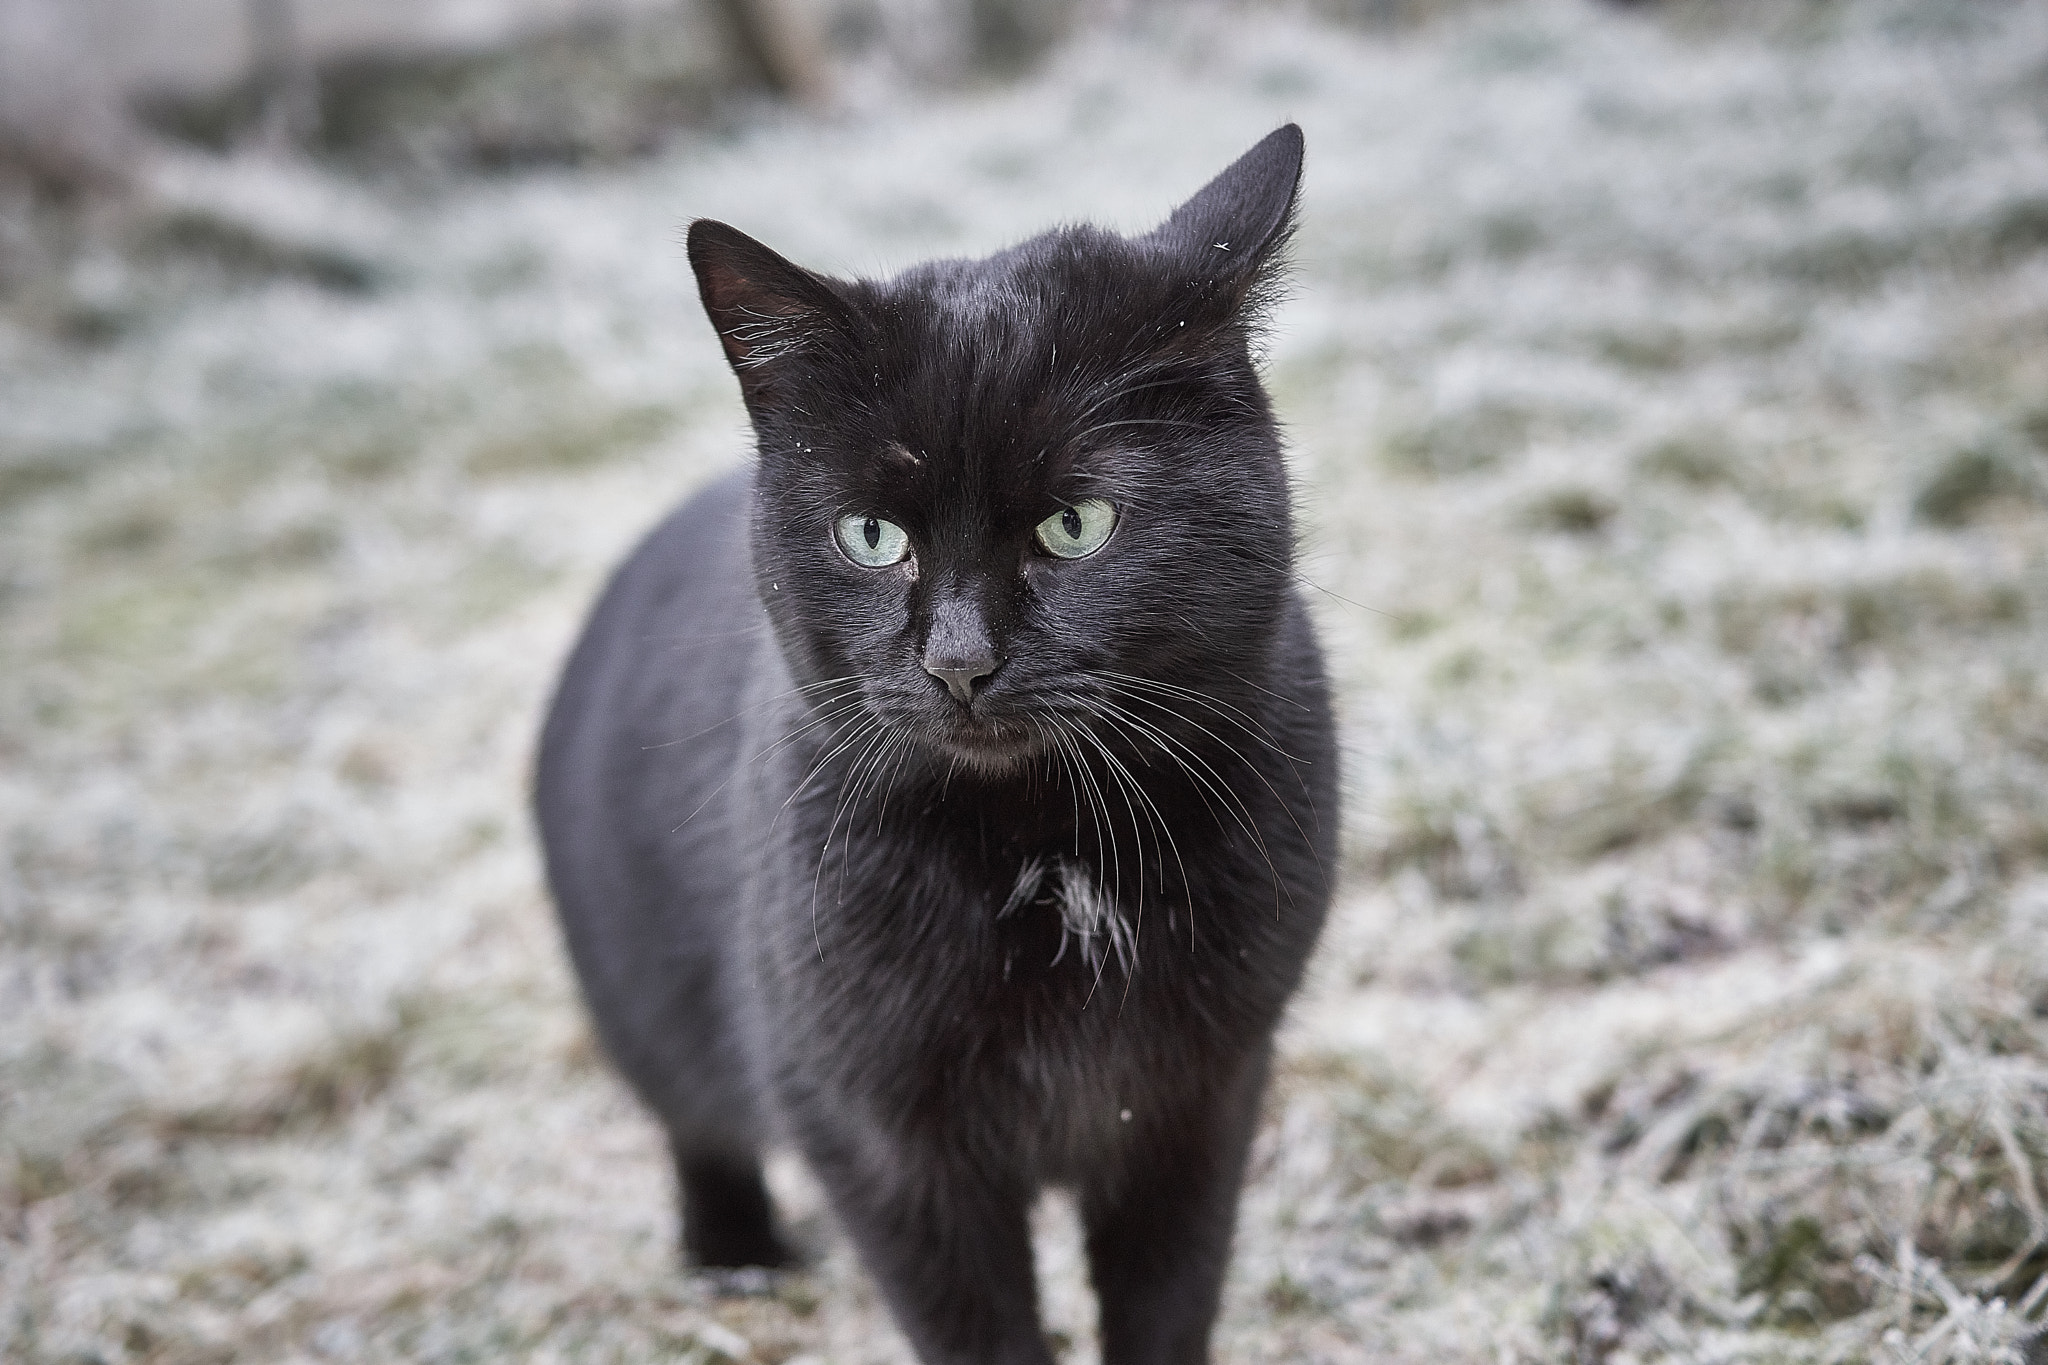 Sony a6000 sample photo. Black cat in the ice photography